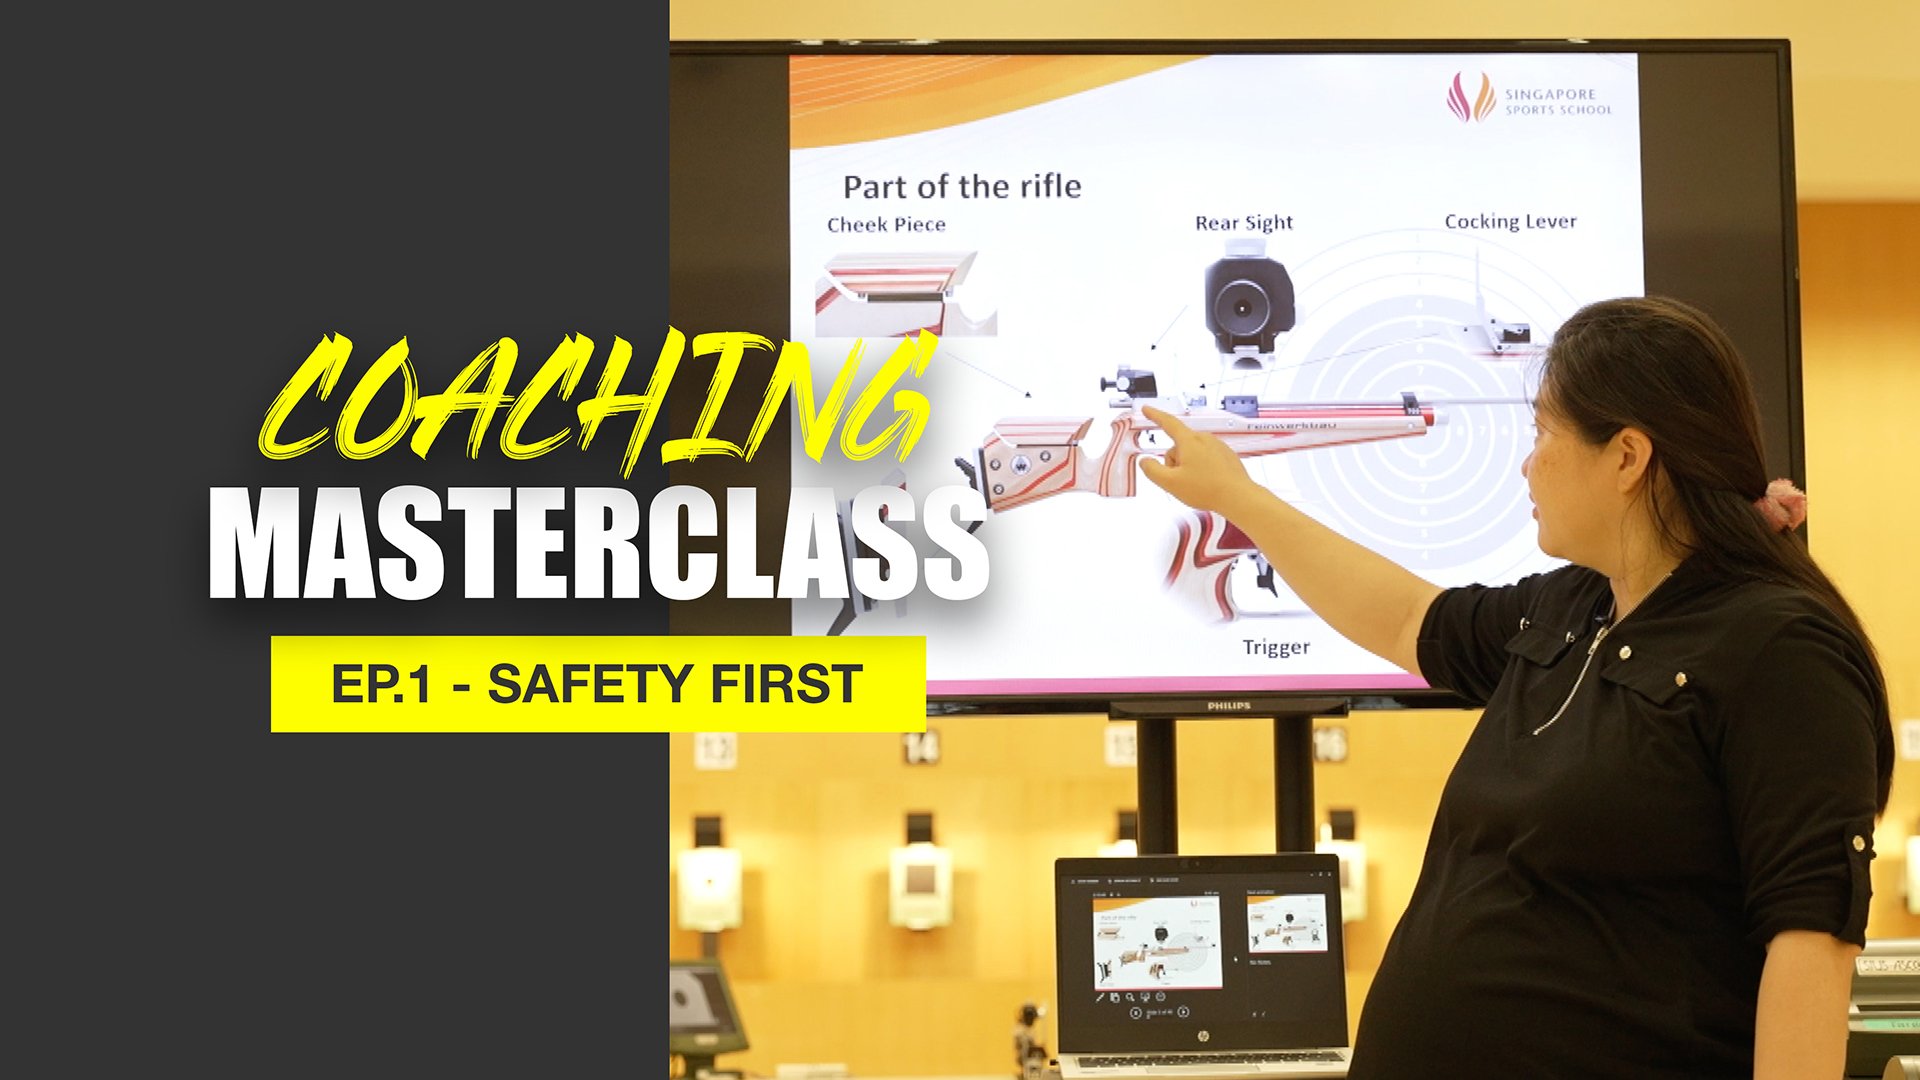 Coaching Masterclass (Shooting) Ep 1 - Safety First